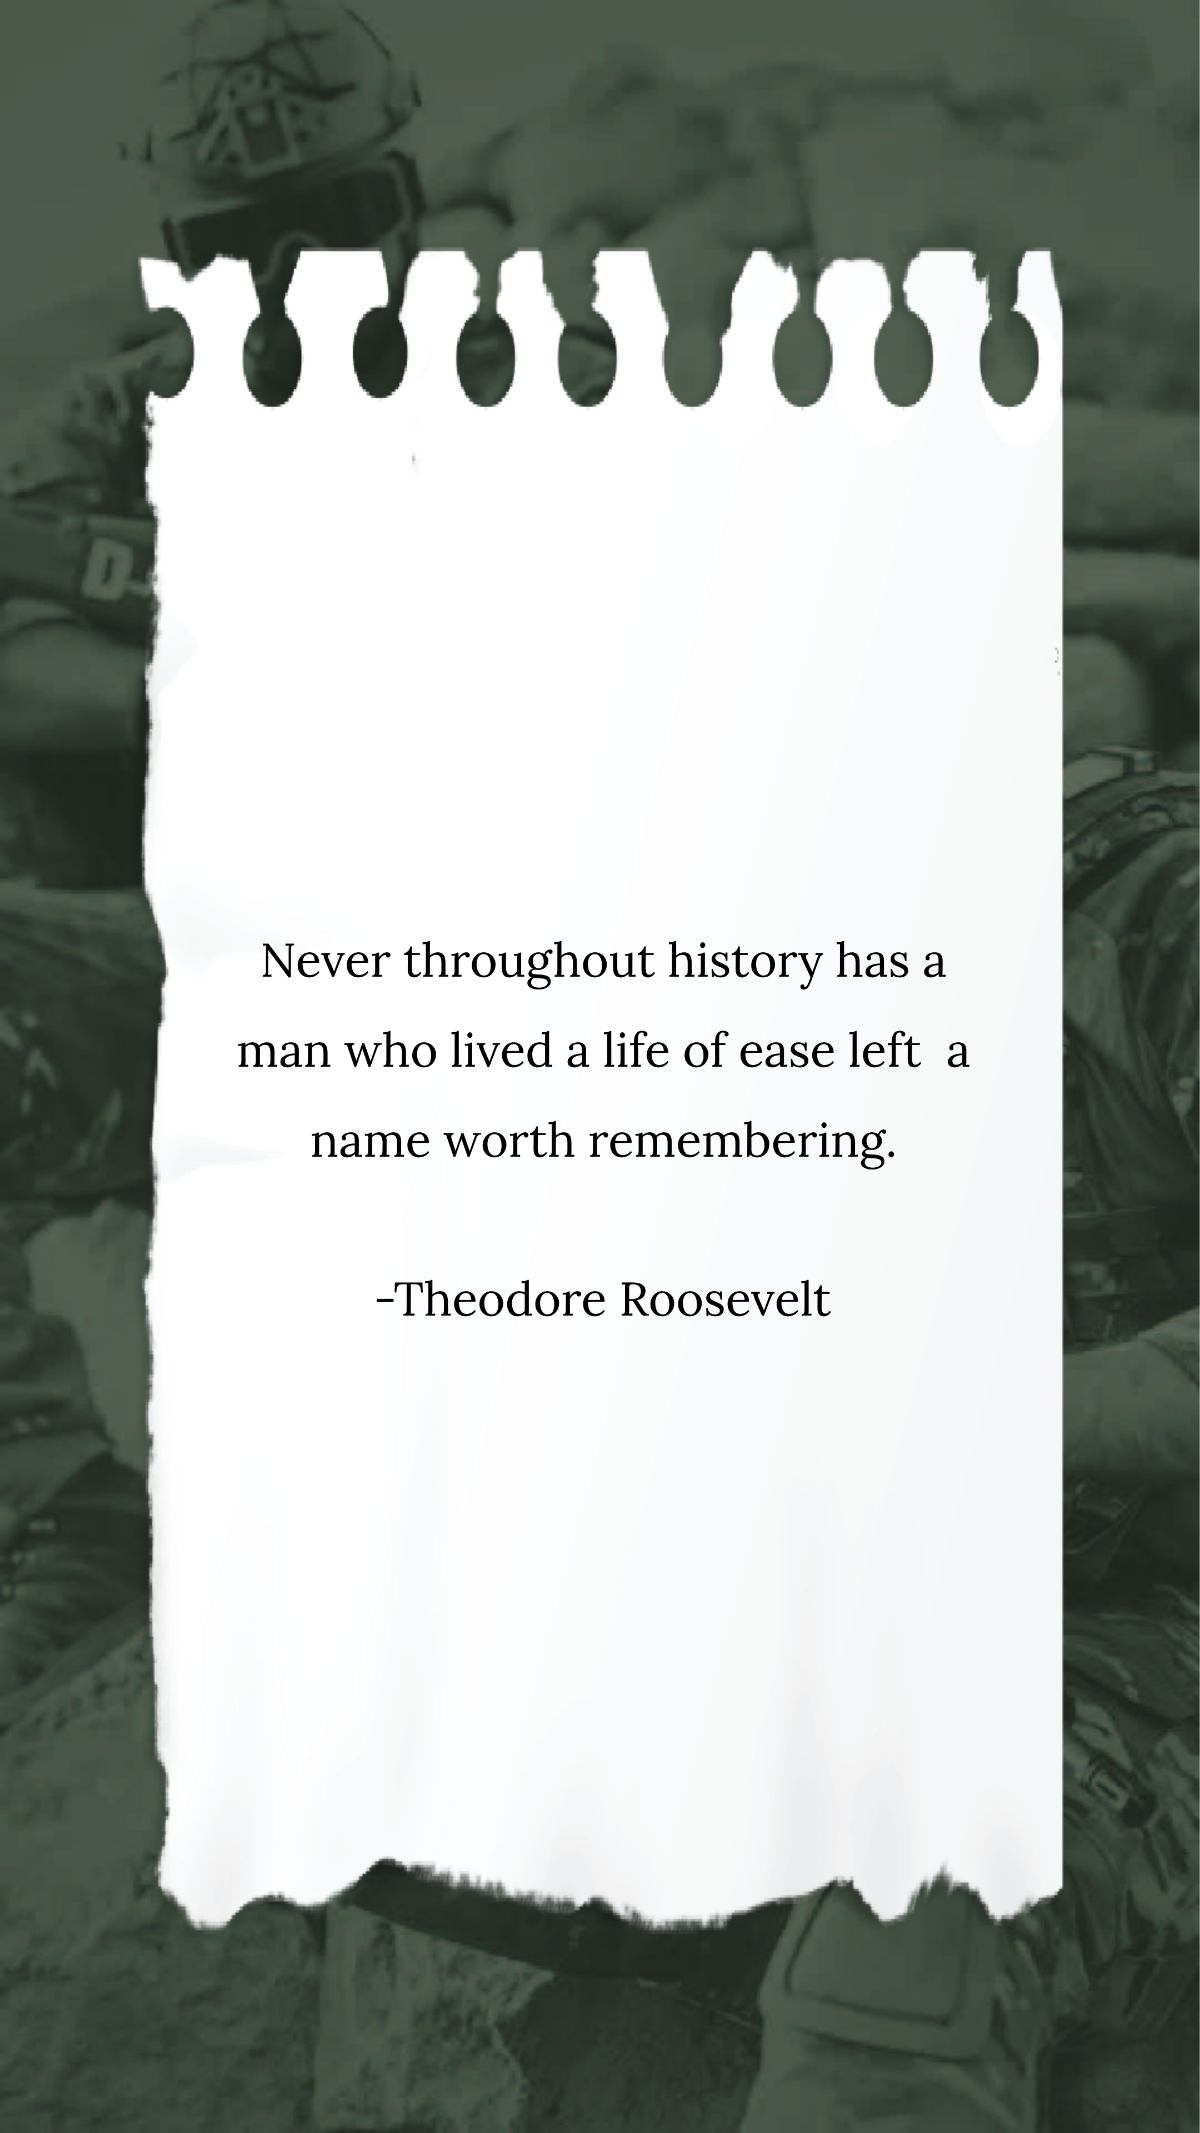 Theodore Roosevelt - Never throughout history has a man who lived a life of ease left a name worth remembering.